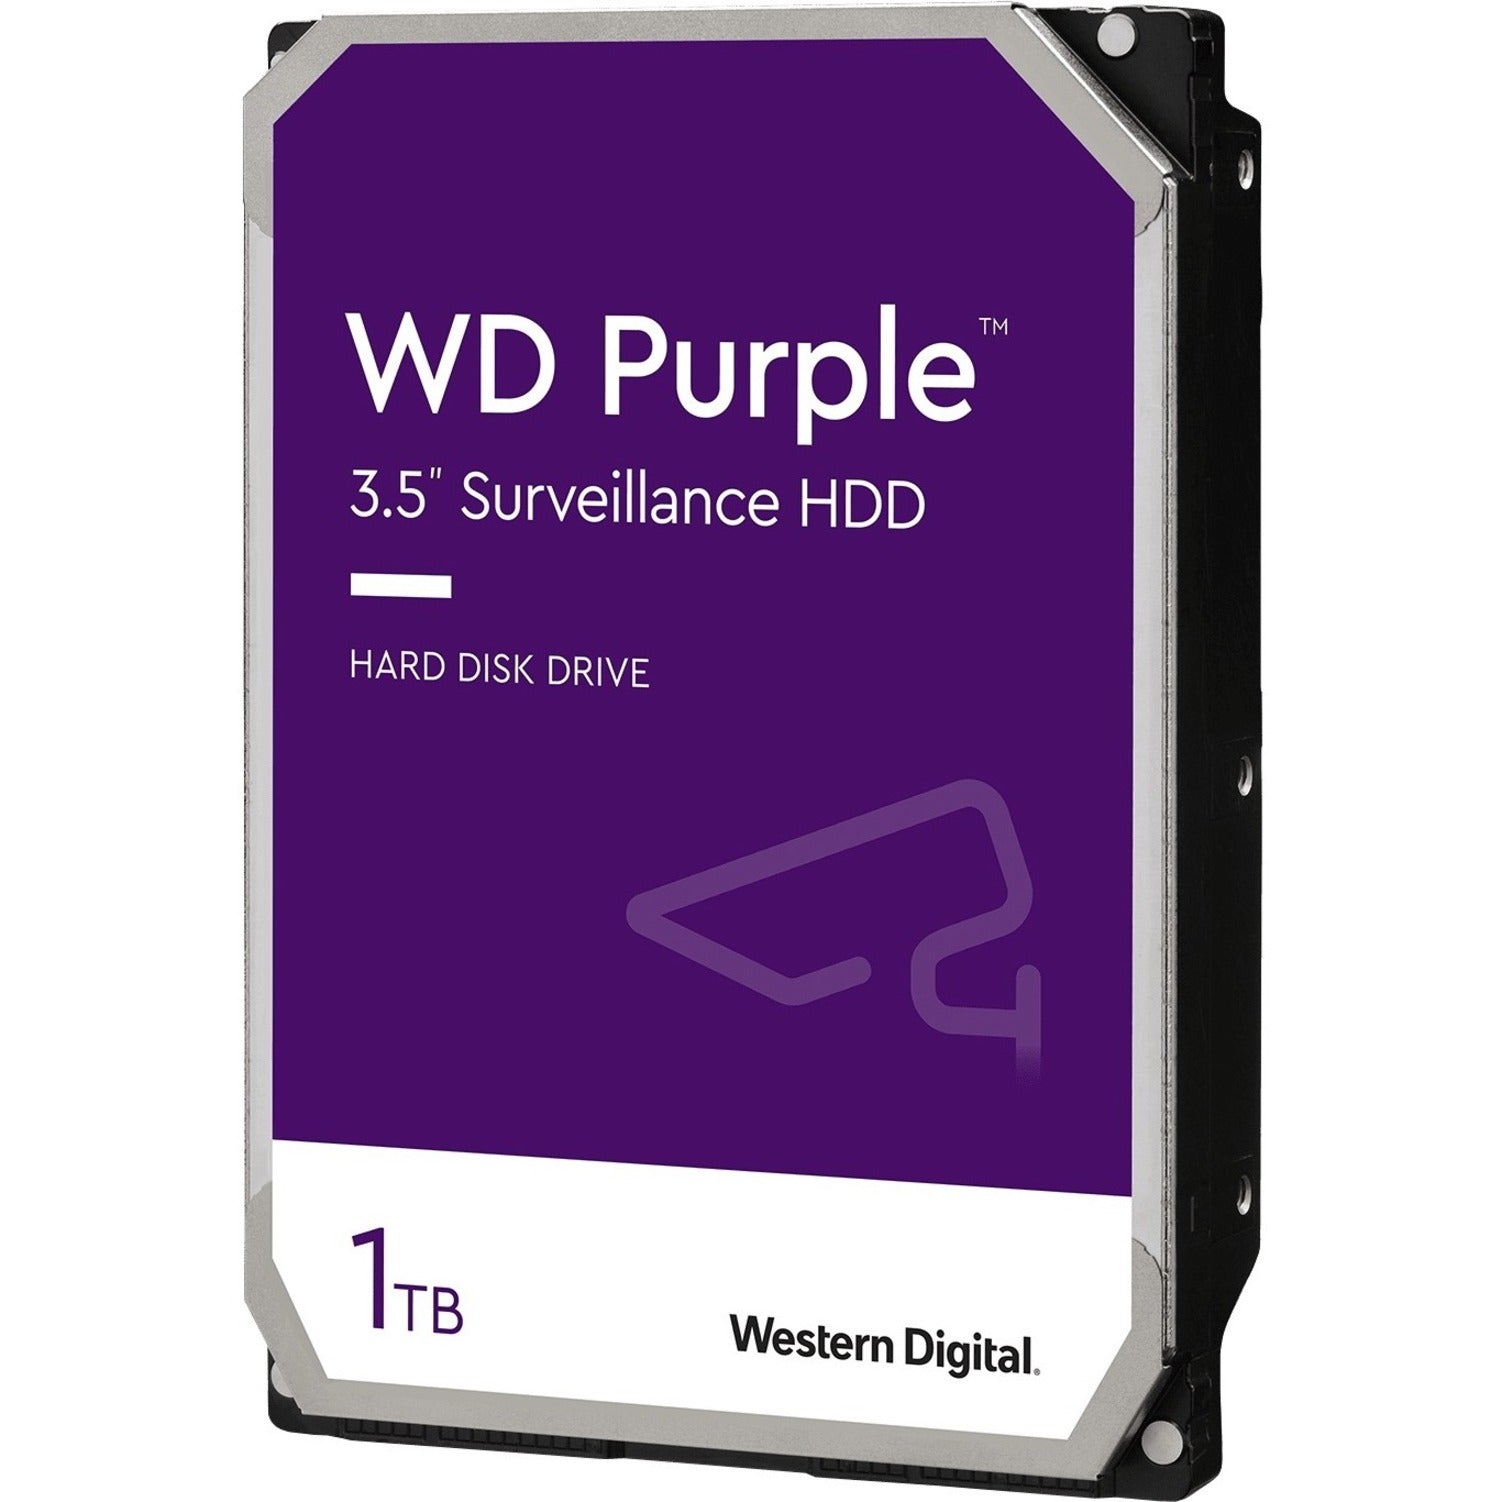 Western Digital WD Purple 1TB Surveillance Hard Drive - Reliable Storage Solution for Network Video Recorders [Discontinued]